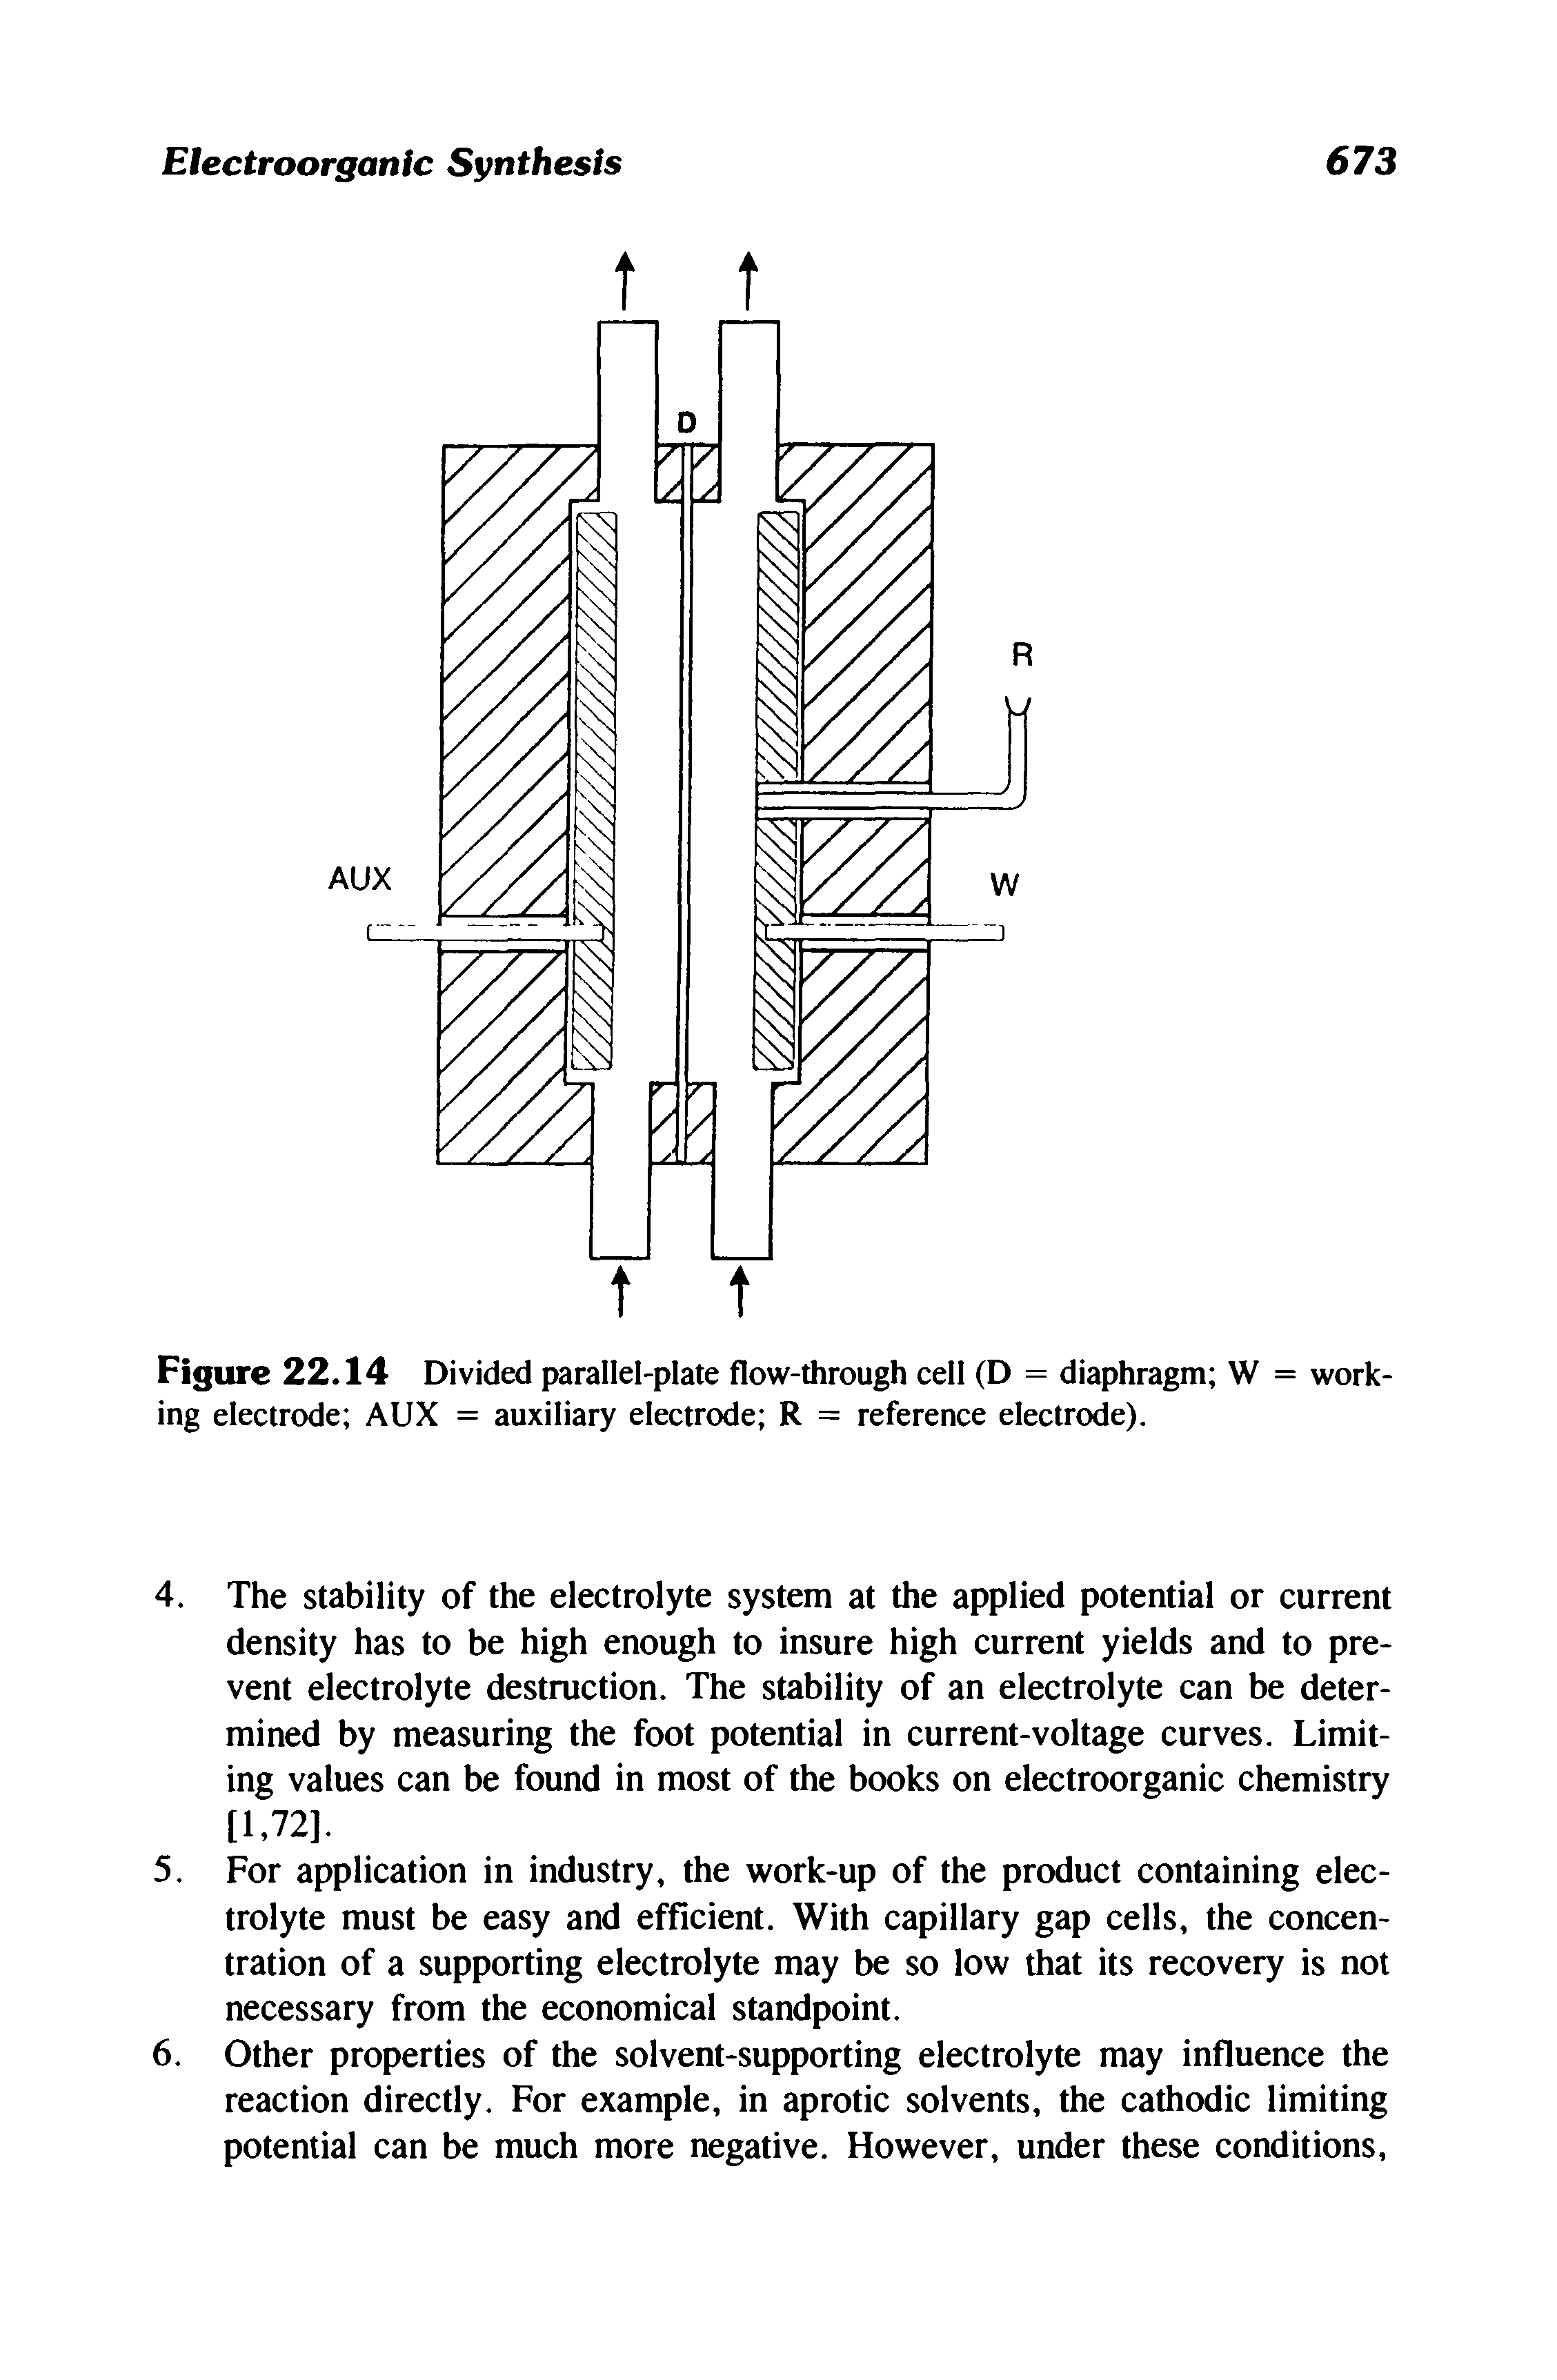 Figure 22.14 Divided parallel-plate flow-through cell (D = diaphragm W = working electrode AUX = auxiliary electrode R = reference electrode).